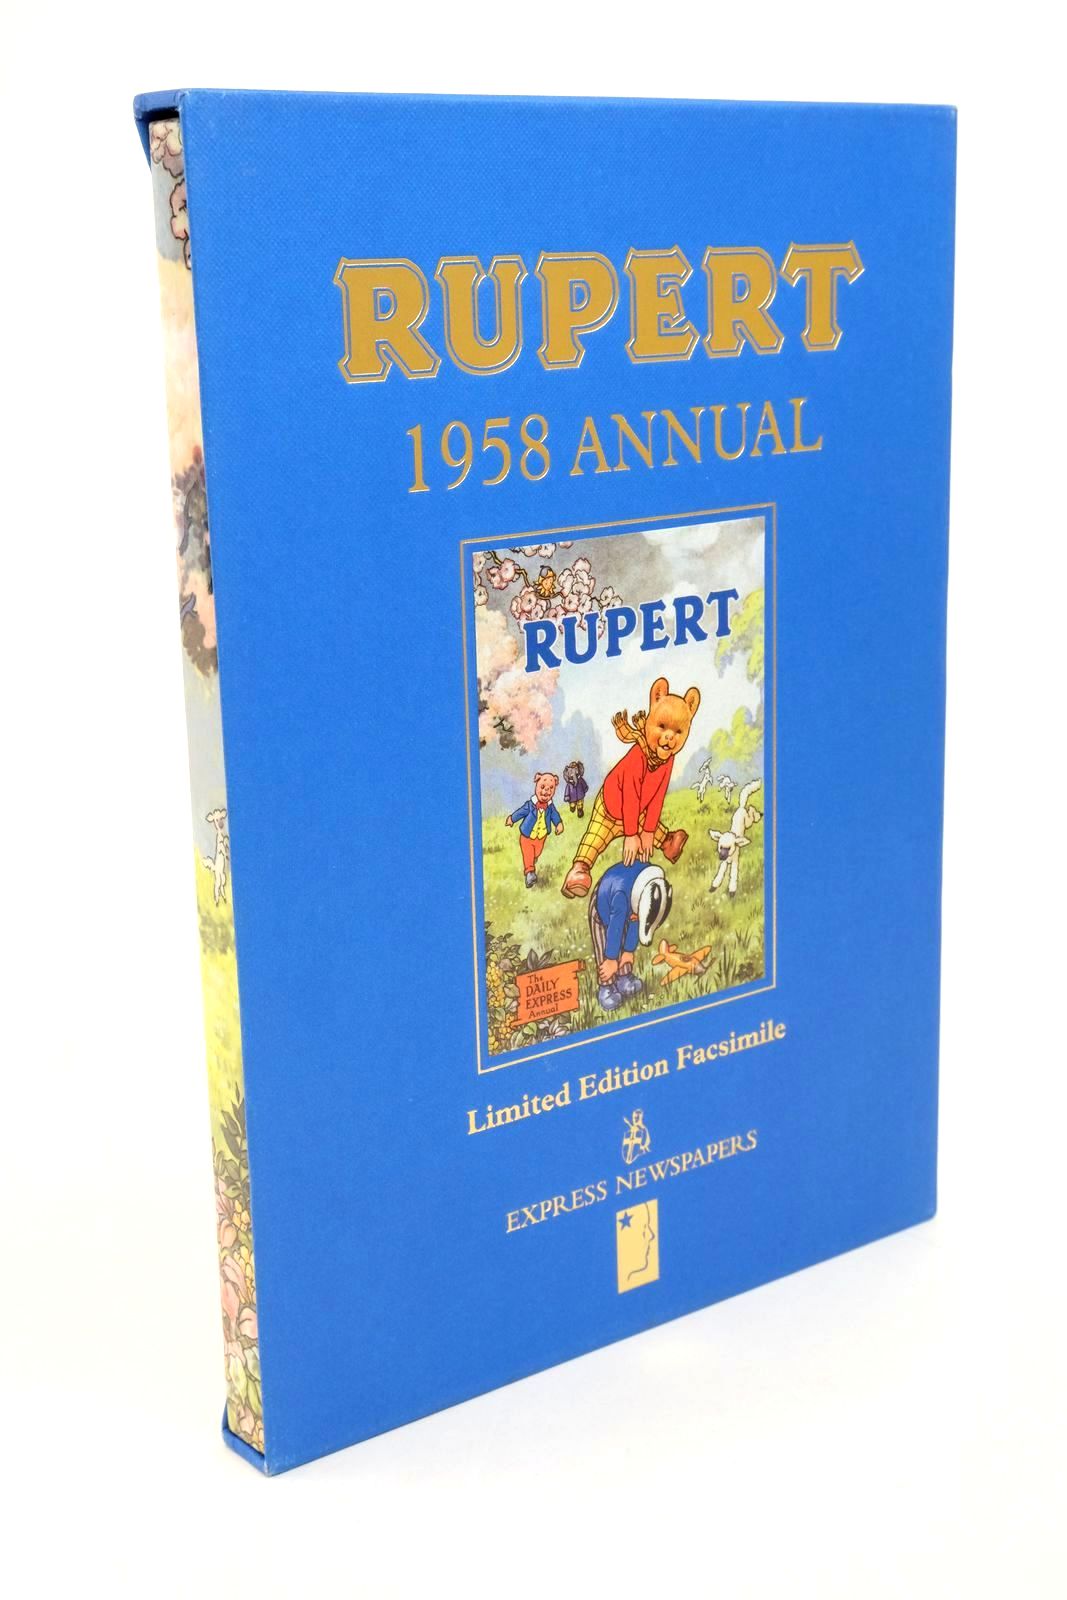 Photo of RUPERT ANNUAL 1958 (FACSIMILE) written by Bestall, Alfred illustrated by Bestall, Alfred published by Express Newspapers Ltd. (STOCK CODE: 1322869)  for sale by Stella & Rose's Books